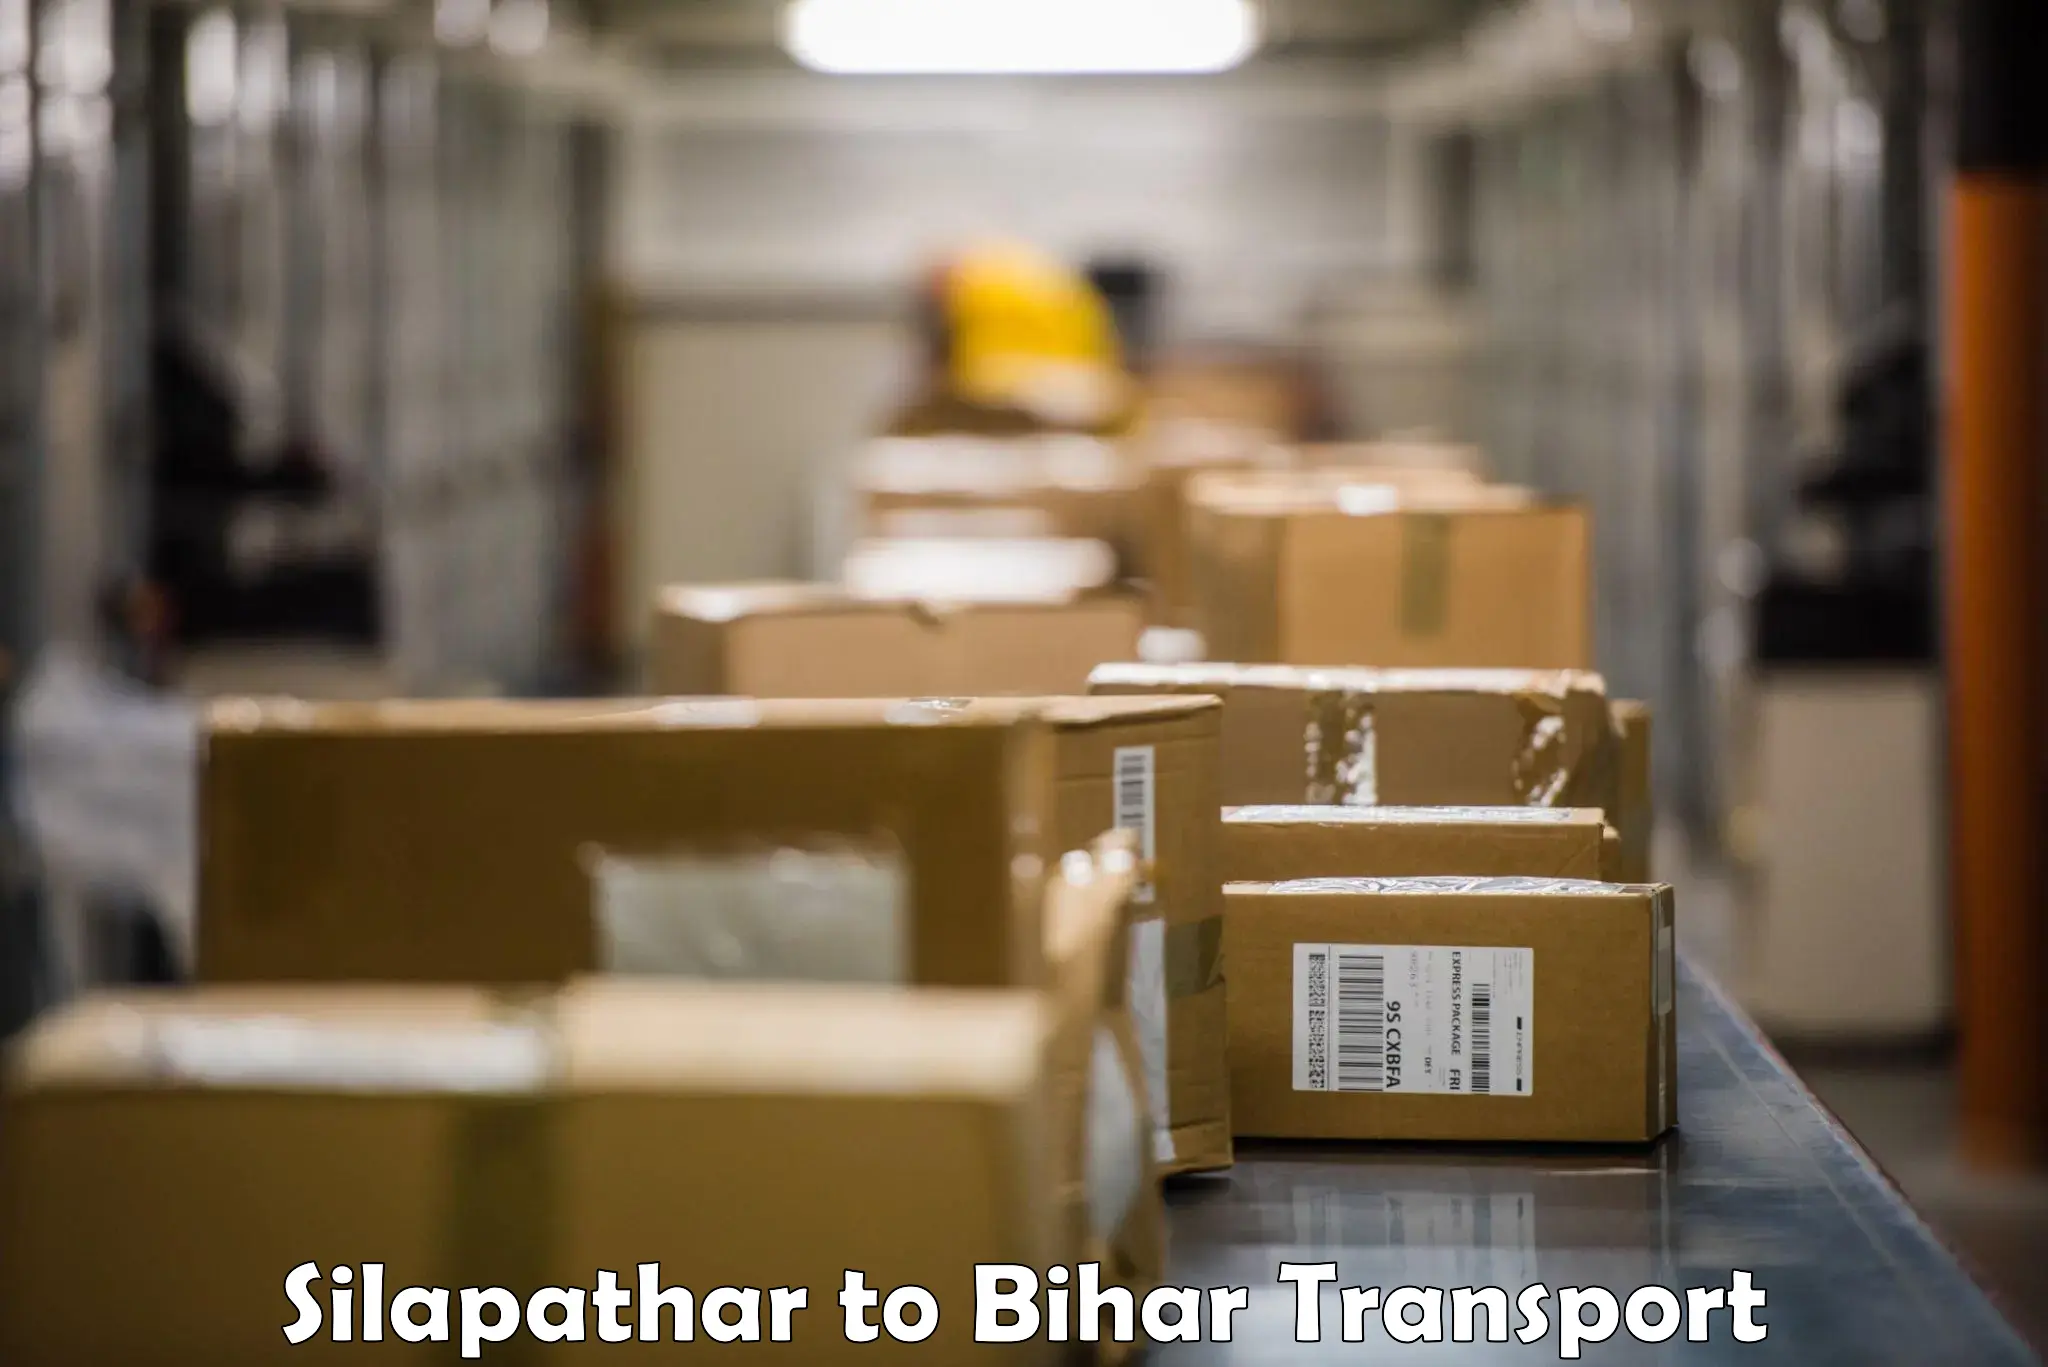 Container transport service Silapathar to Sultanganj